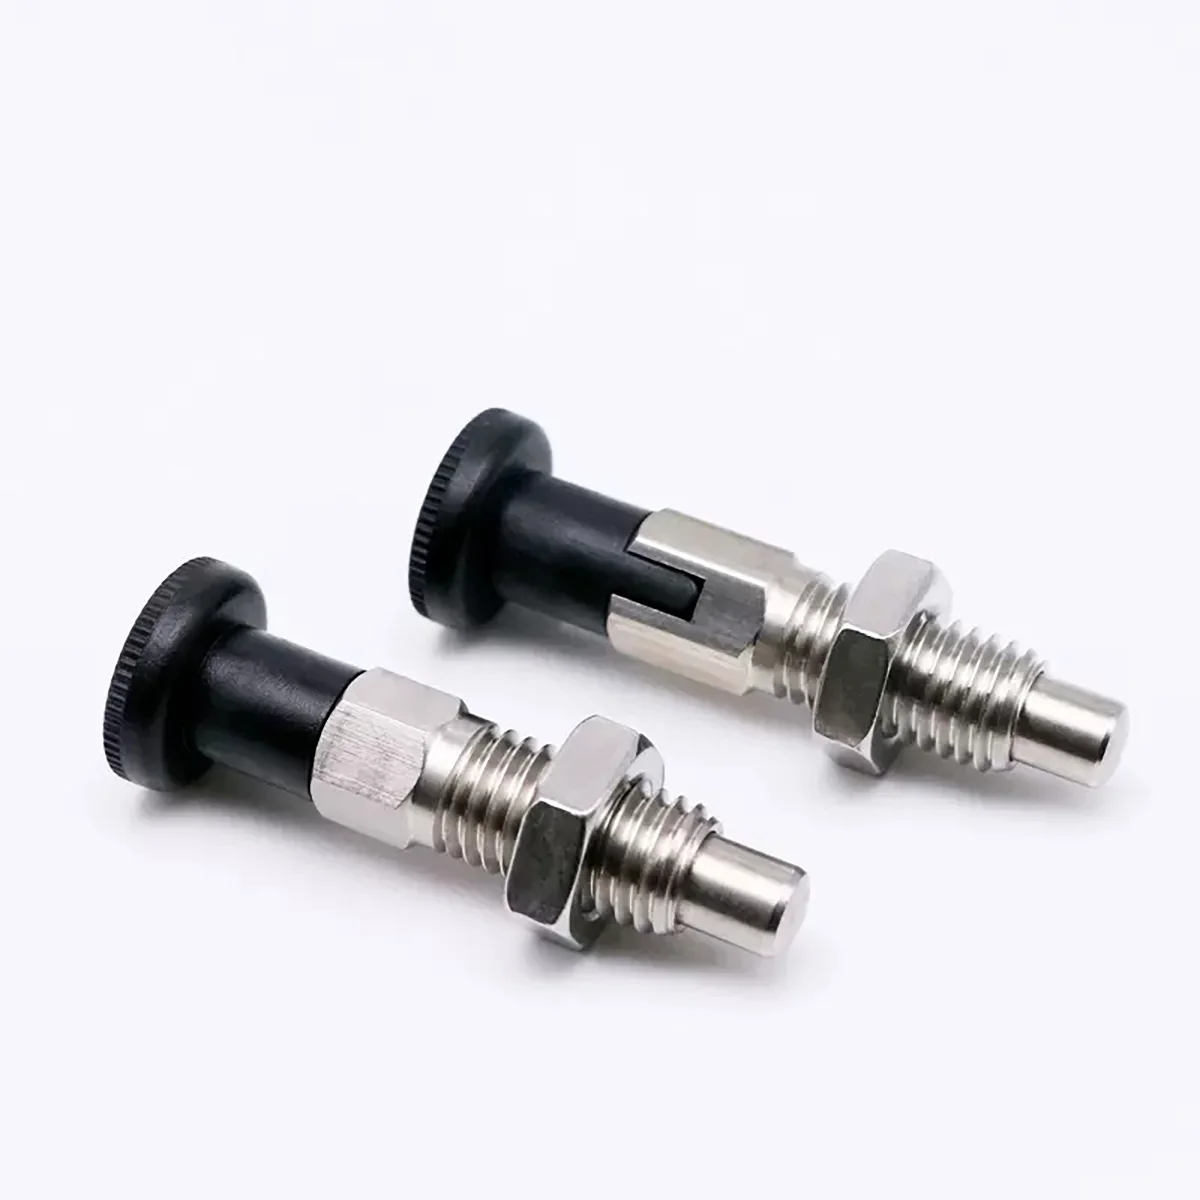 

Knob Plunger Self-Locking Stainless Steel Spring Positioning Pin/Reset Type Indexing Pin/Coarse Thread